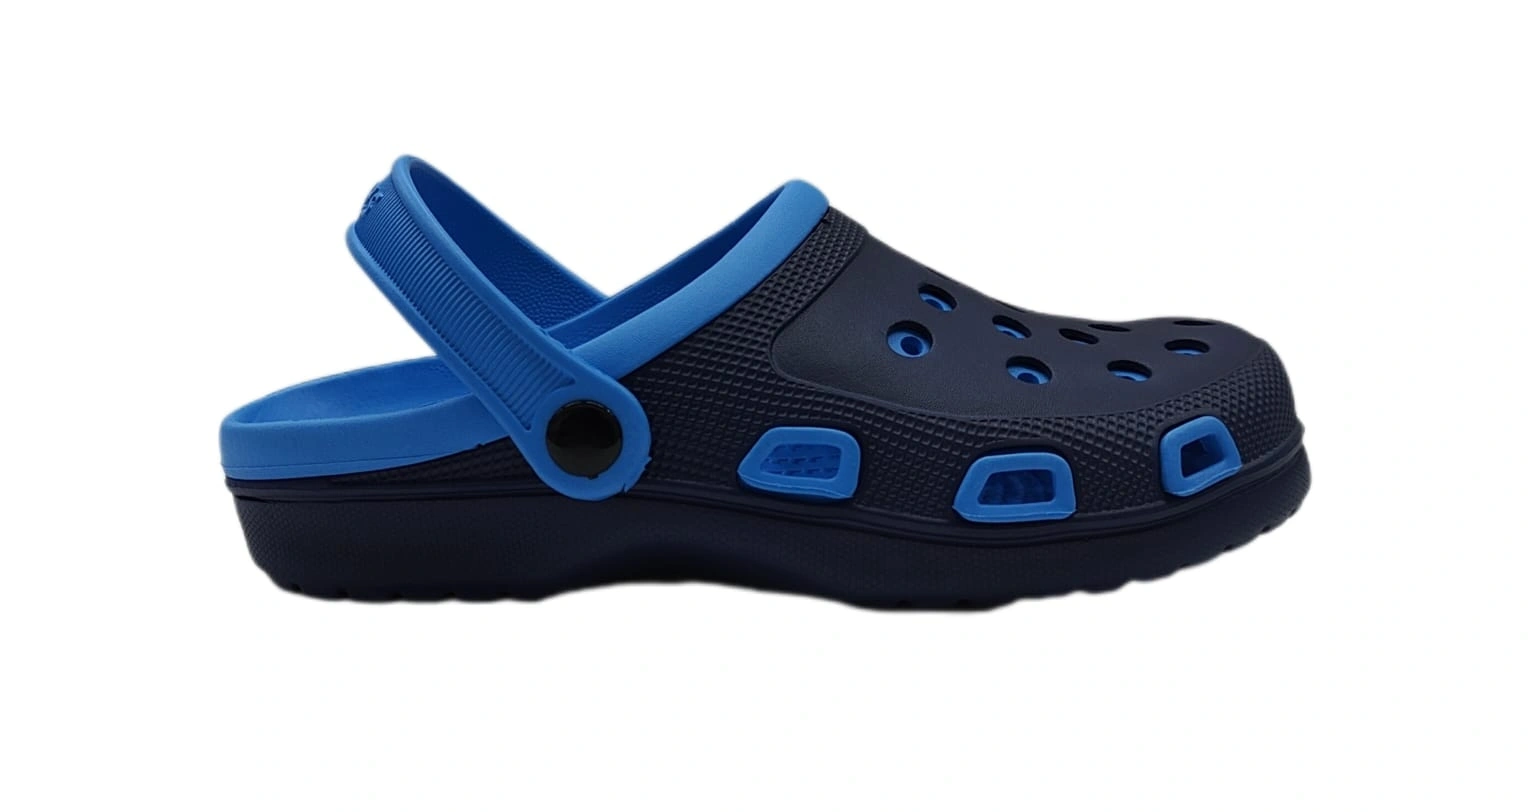 Clog Sandals for Men and Women: Comfortable, Lightweight Design with Durable Upper and Slip-Resistant Outsole for All-Day Wear-Blue-UK 7-1